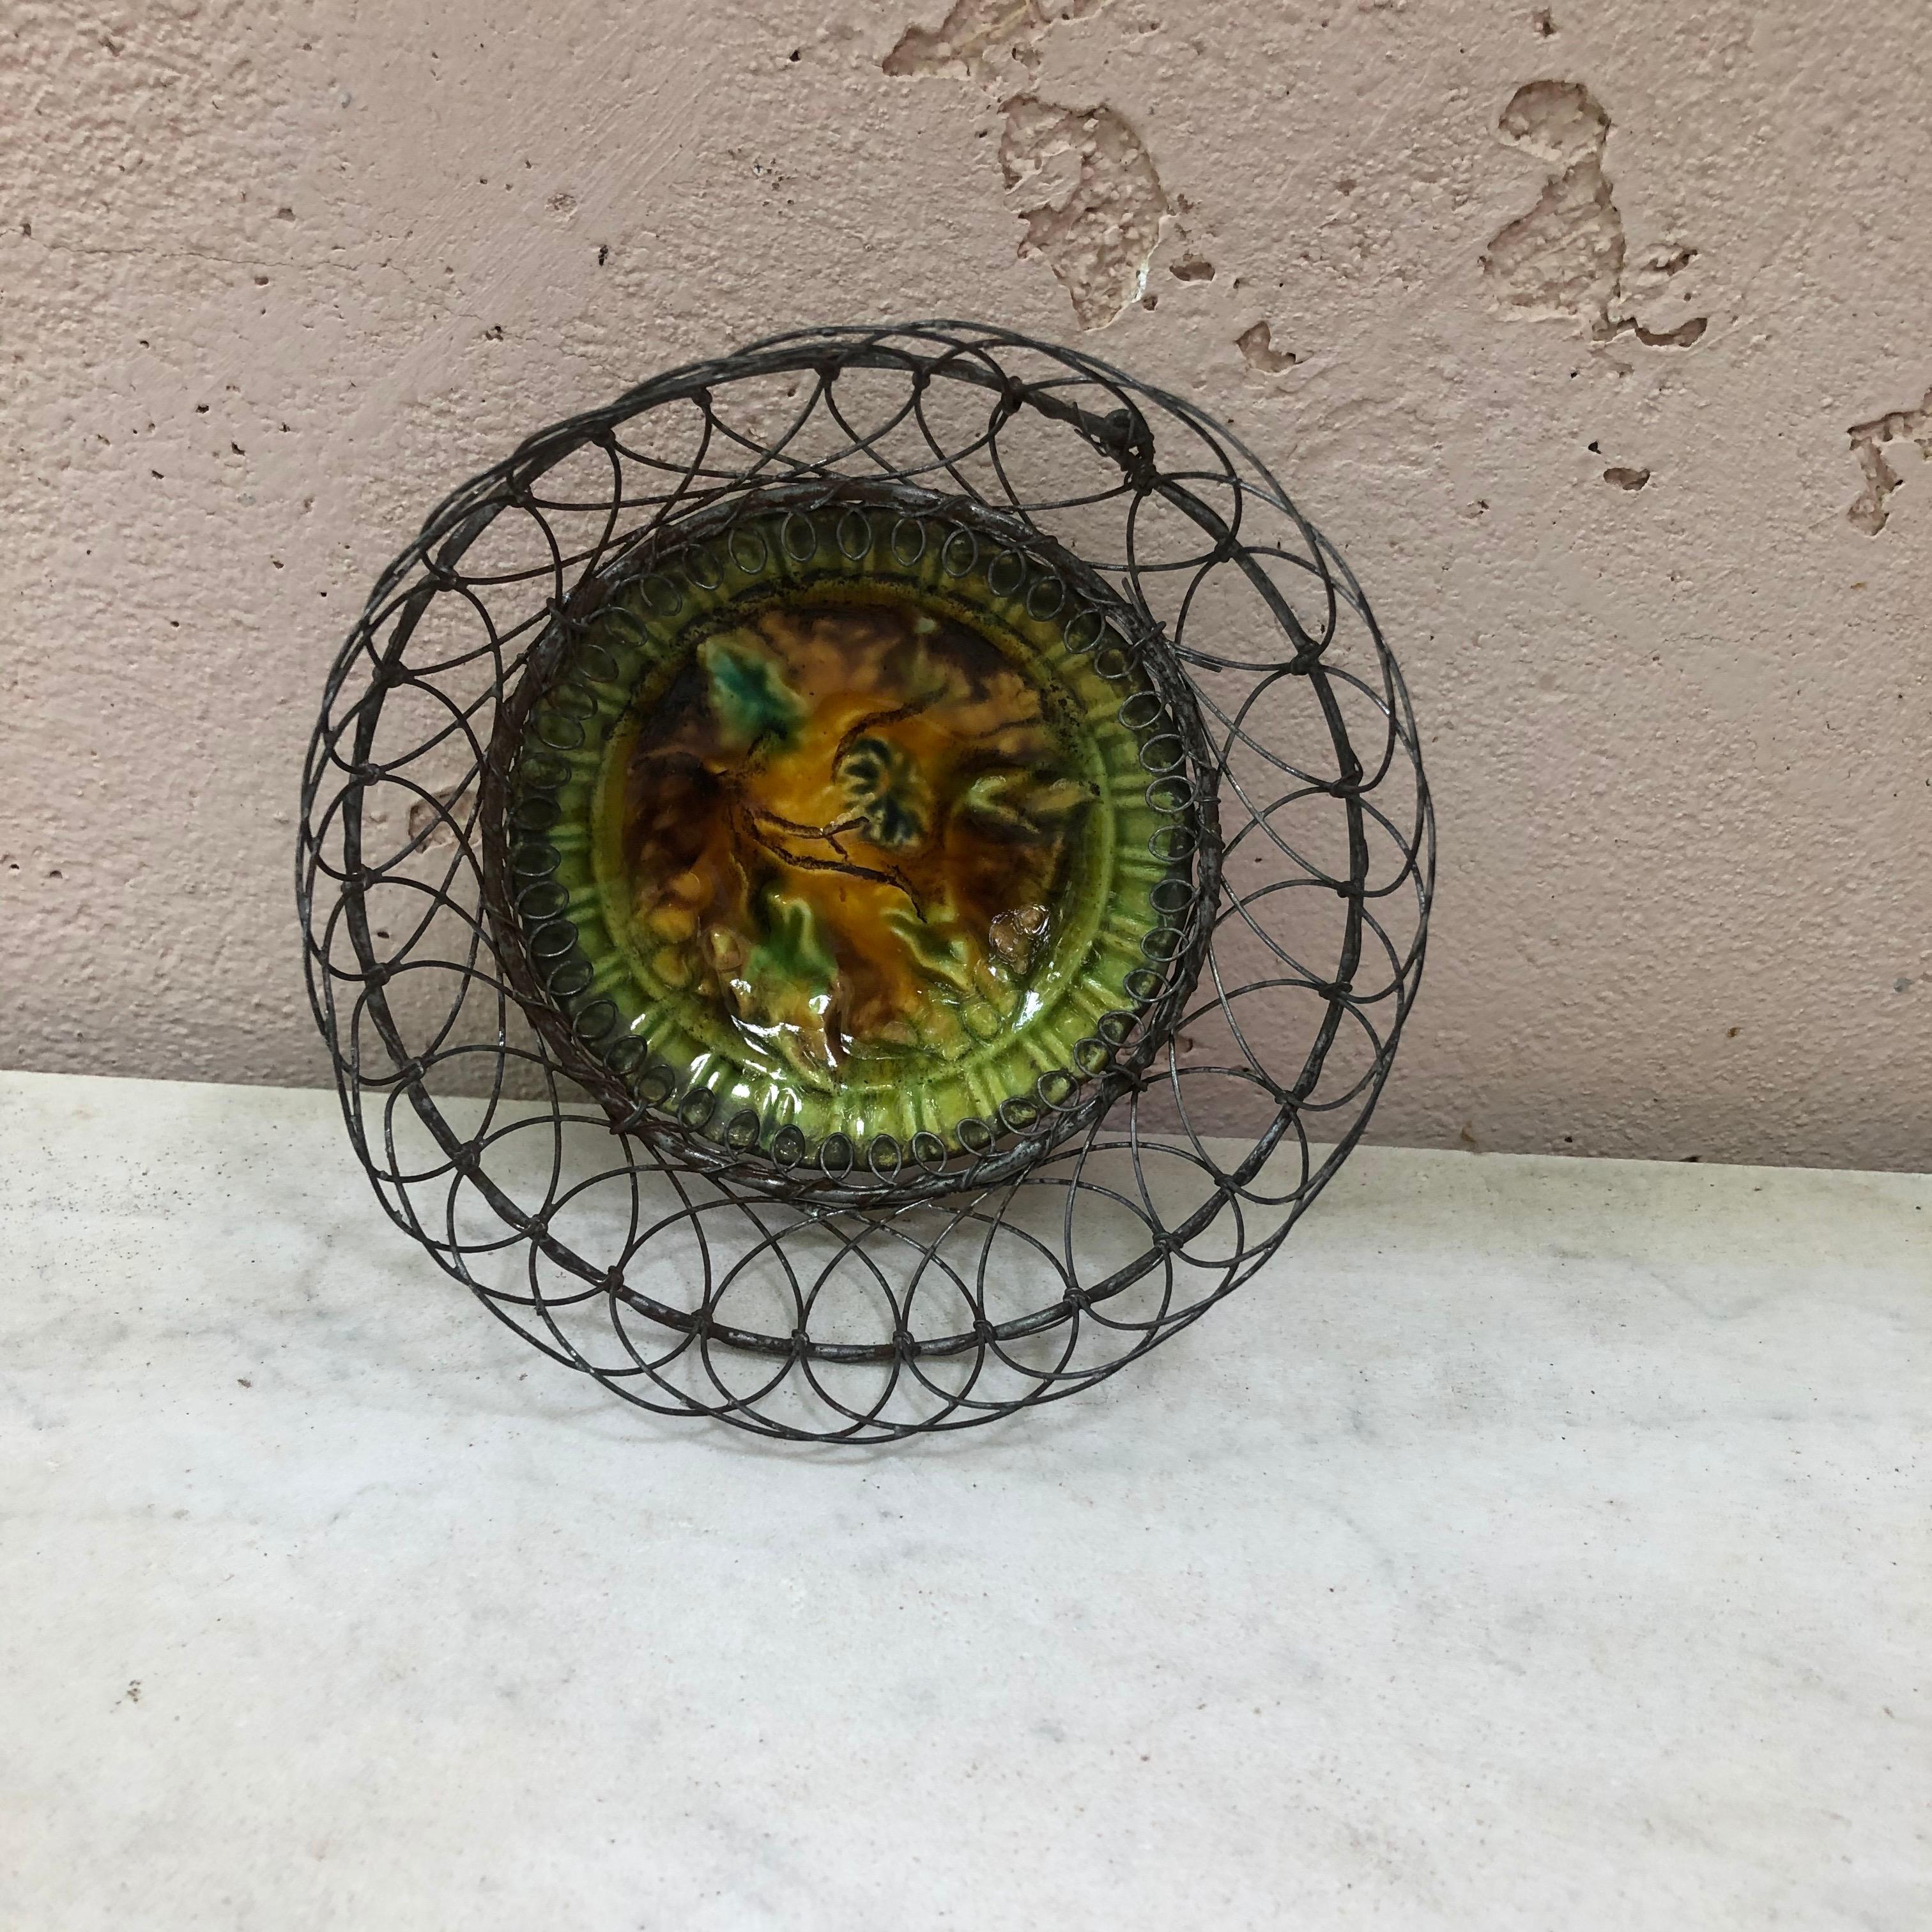 Charming Majolica wire basket with leaves signed Villeroy & Boch, circa 1900.